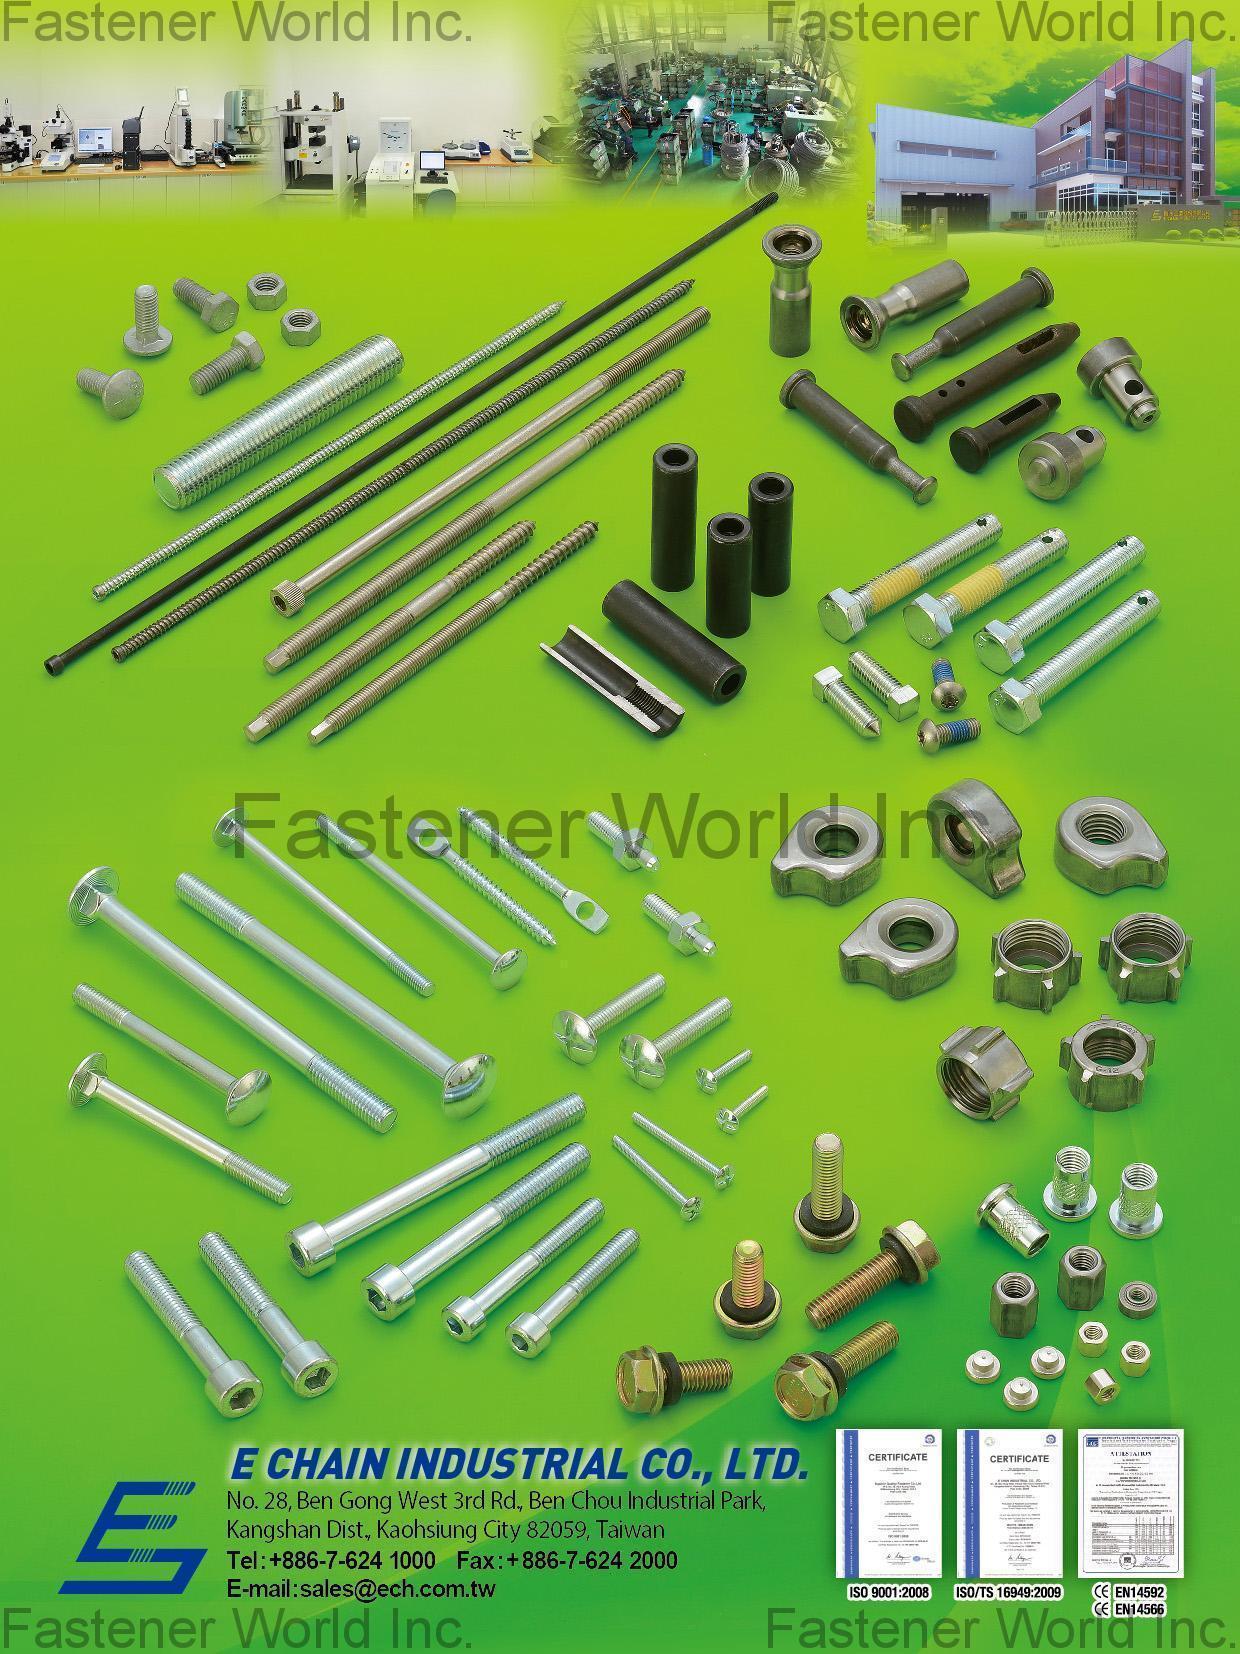 E CHAIN INDUSTRIAL CO., LTD. , Chipboard Screws, Self-Drilling Screws, Machine Screws, Tapping Screws, Close Die Parts, Drywall Screws, Stamping Parts, Carriage Bolts, Weld Bushing Weld Screws, Weld Nuts, Lug Nuts, Eye Bolts, Spring Nuts, Thread Rod, Turning Parts , CNC parts, CNC lathe